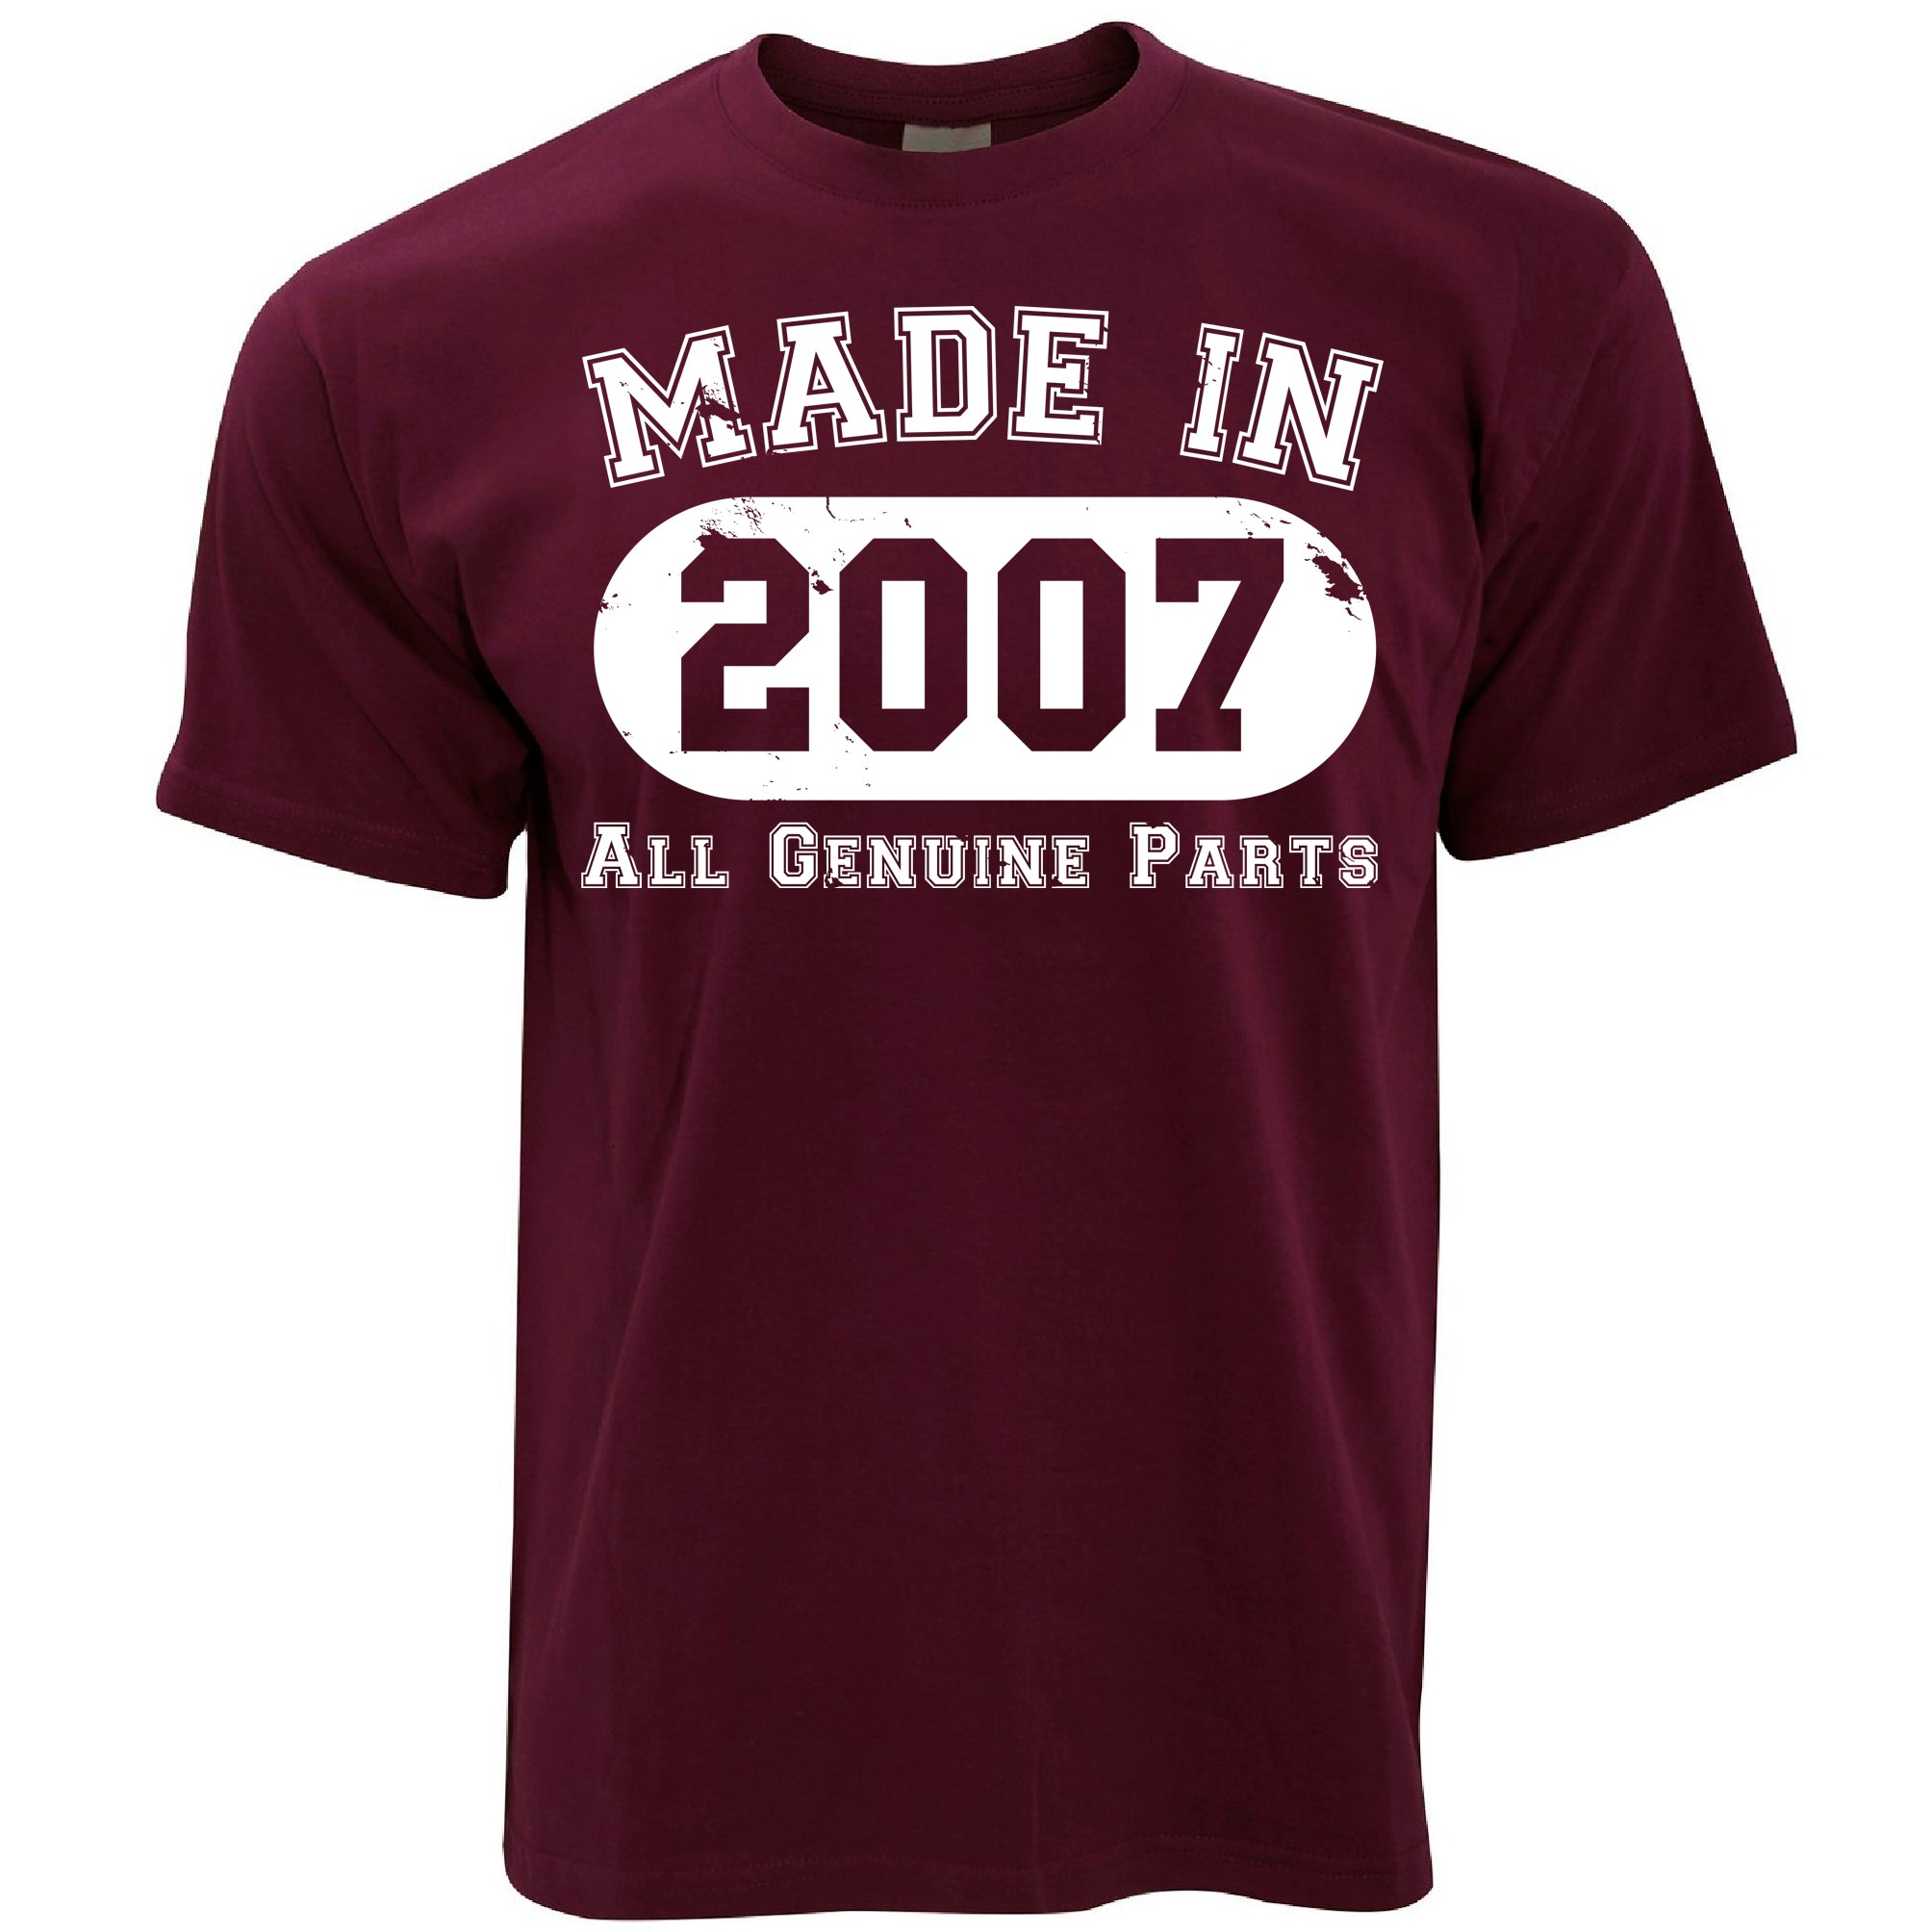 16th Birthday T Shirt Made in 2007 - All Genuine Parts